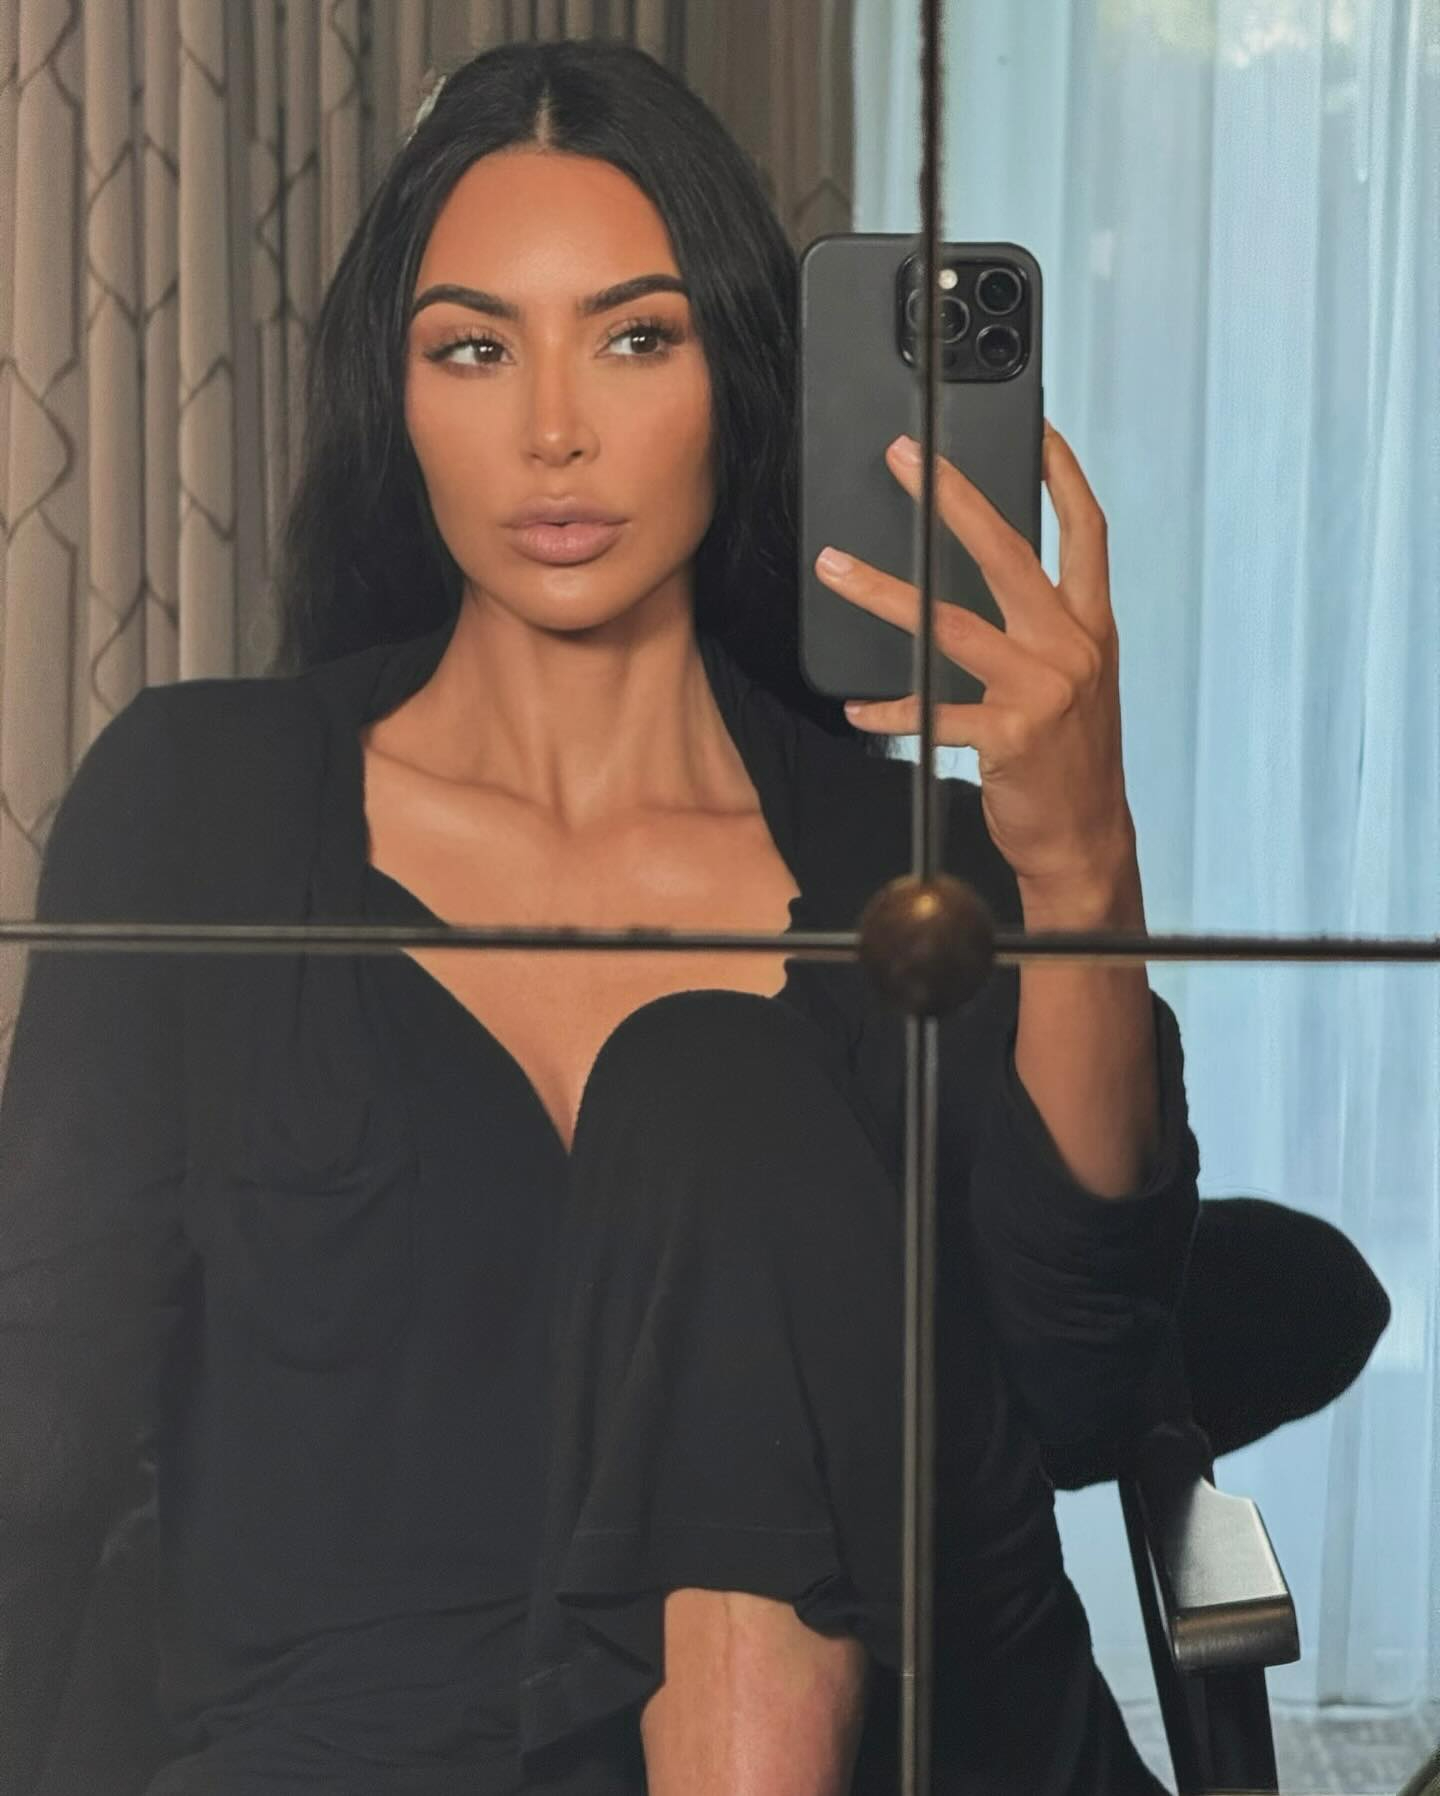 On Sunday, a selfie of Kim's led to rumors that she'd had a nose job